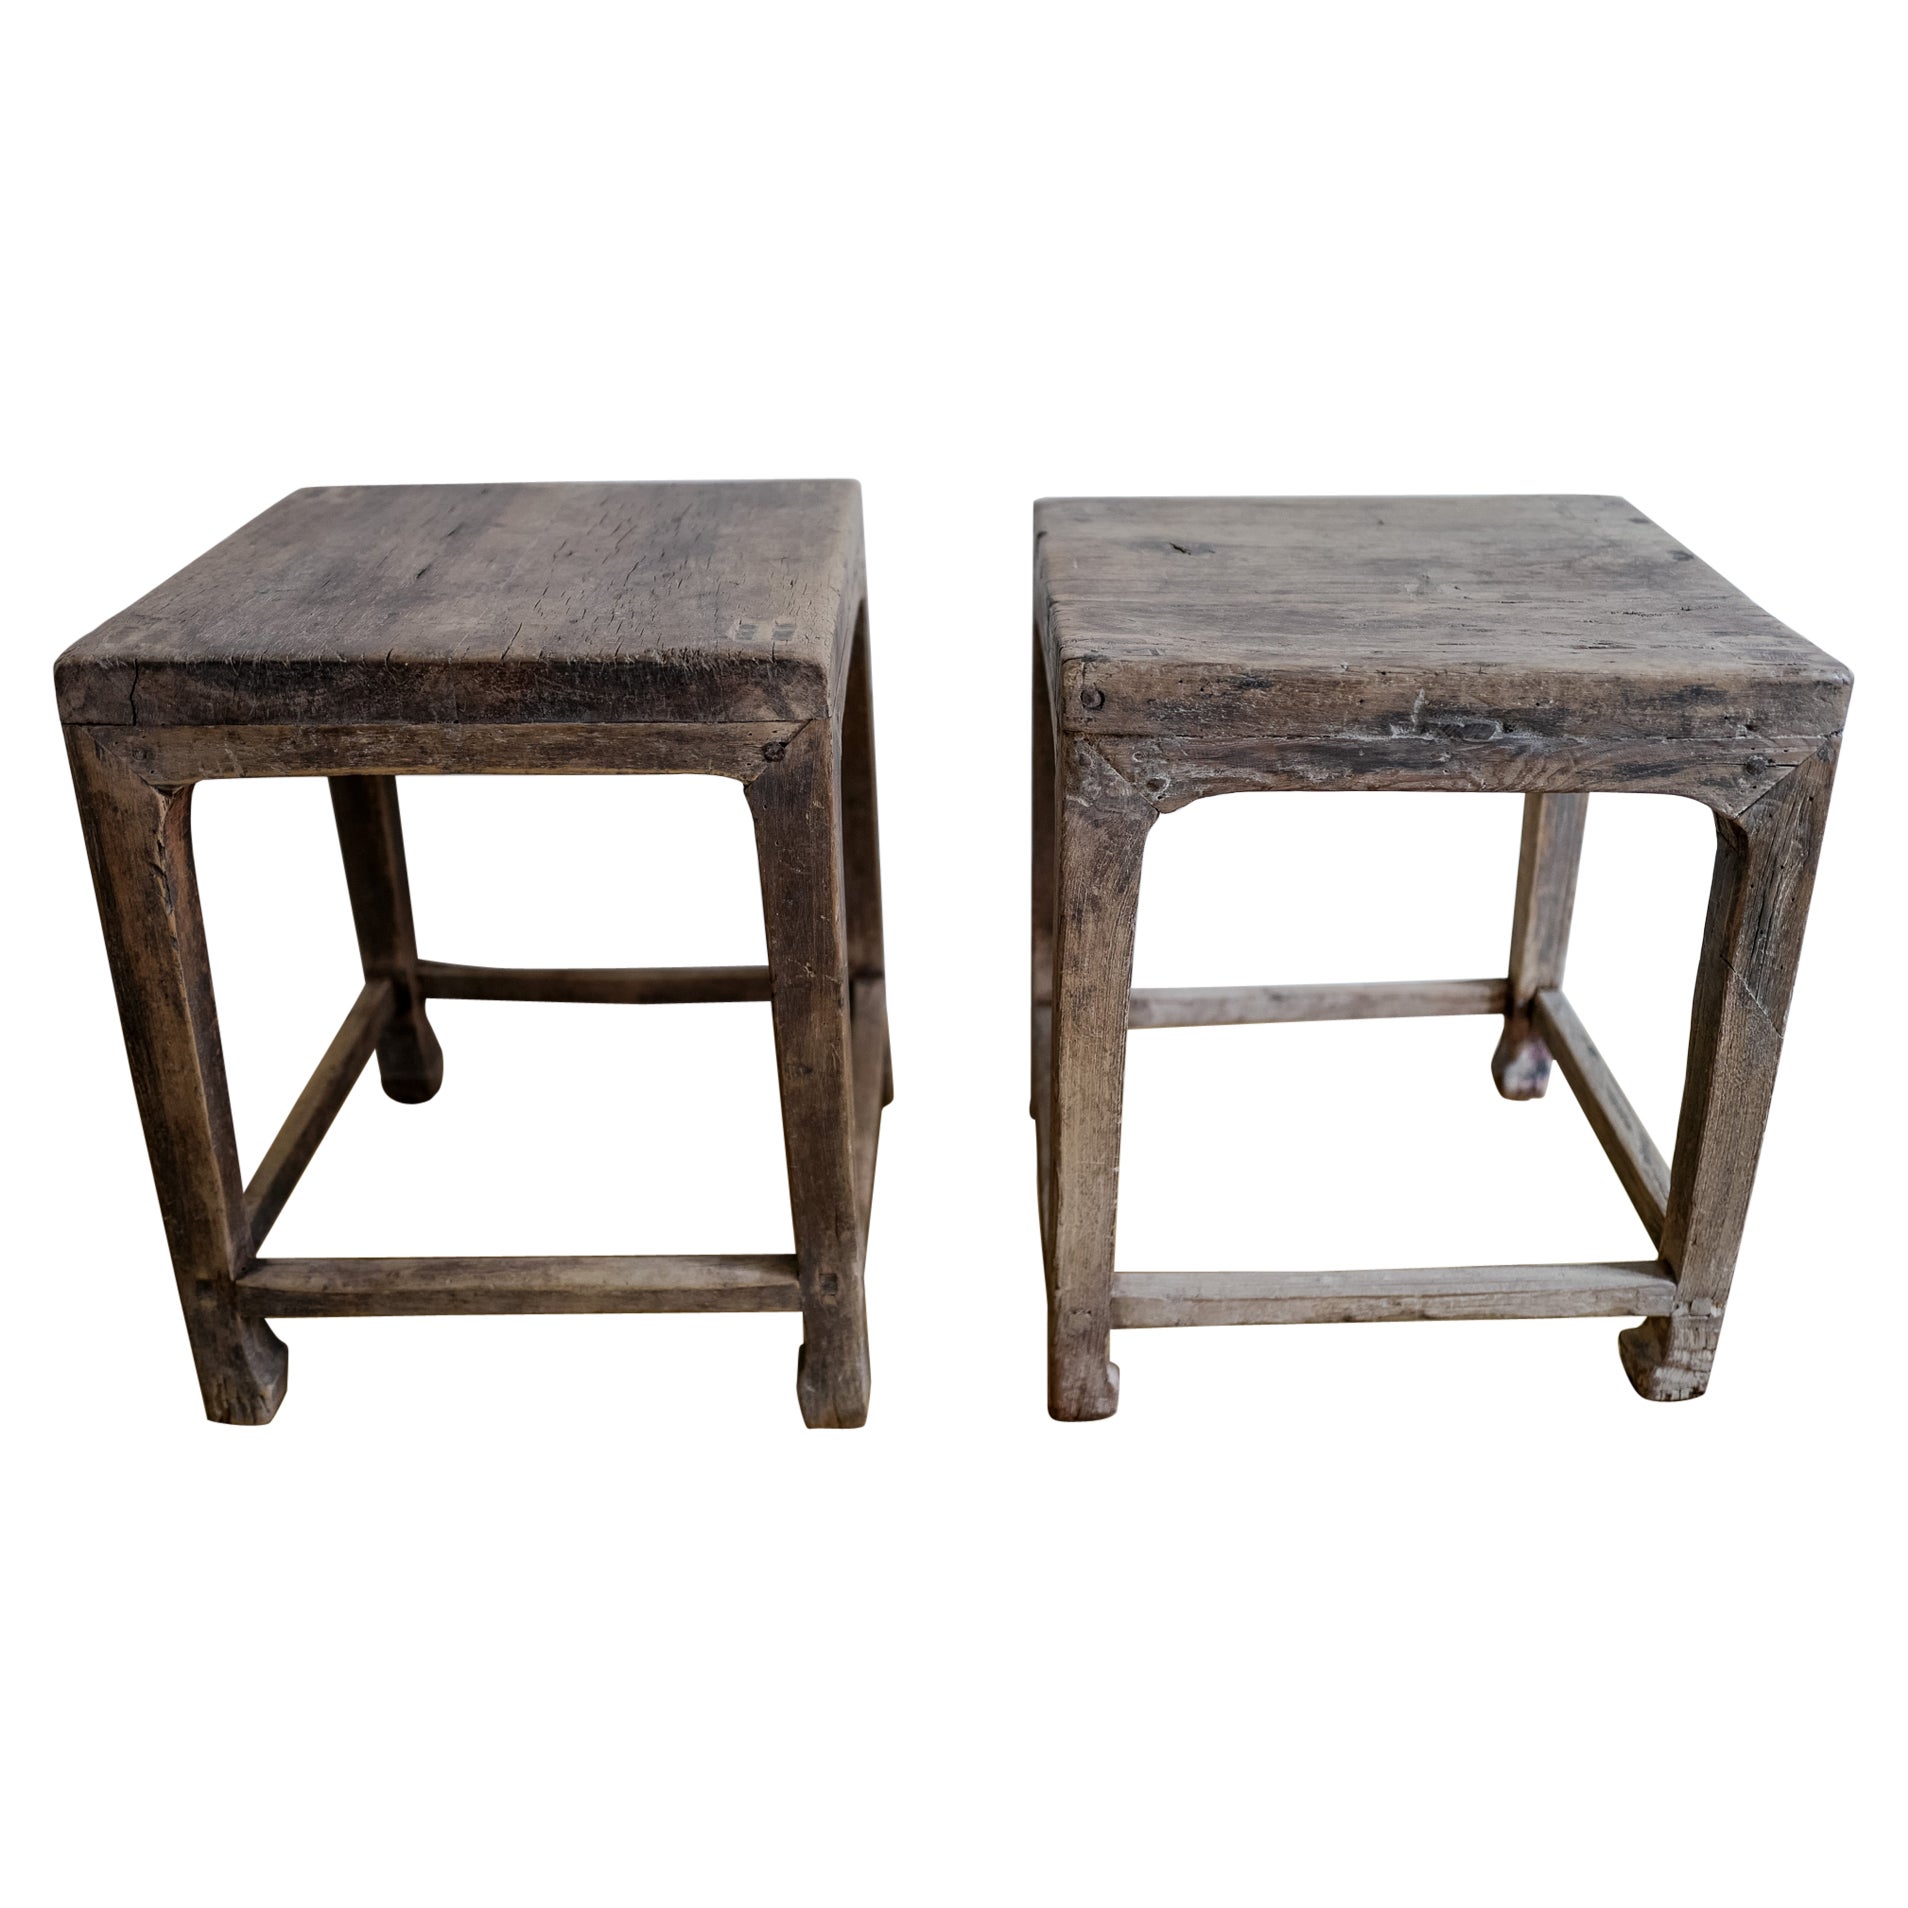 Handcrafted Elm Side Tables, Made in China, circa Early 20th Century